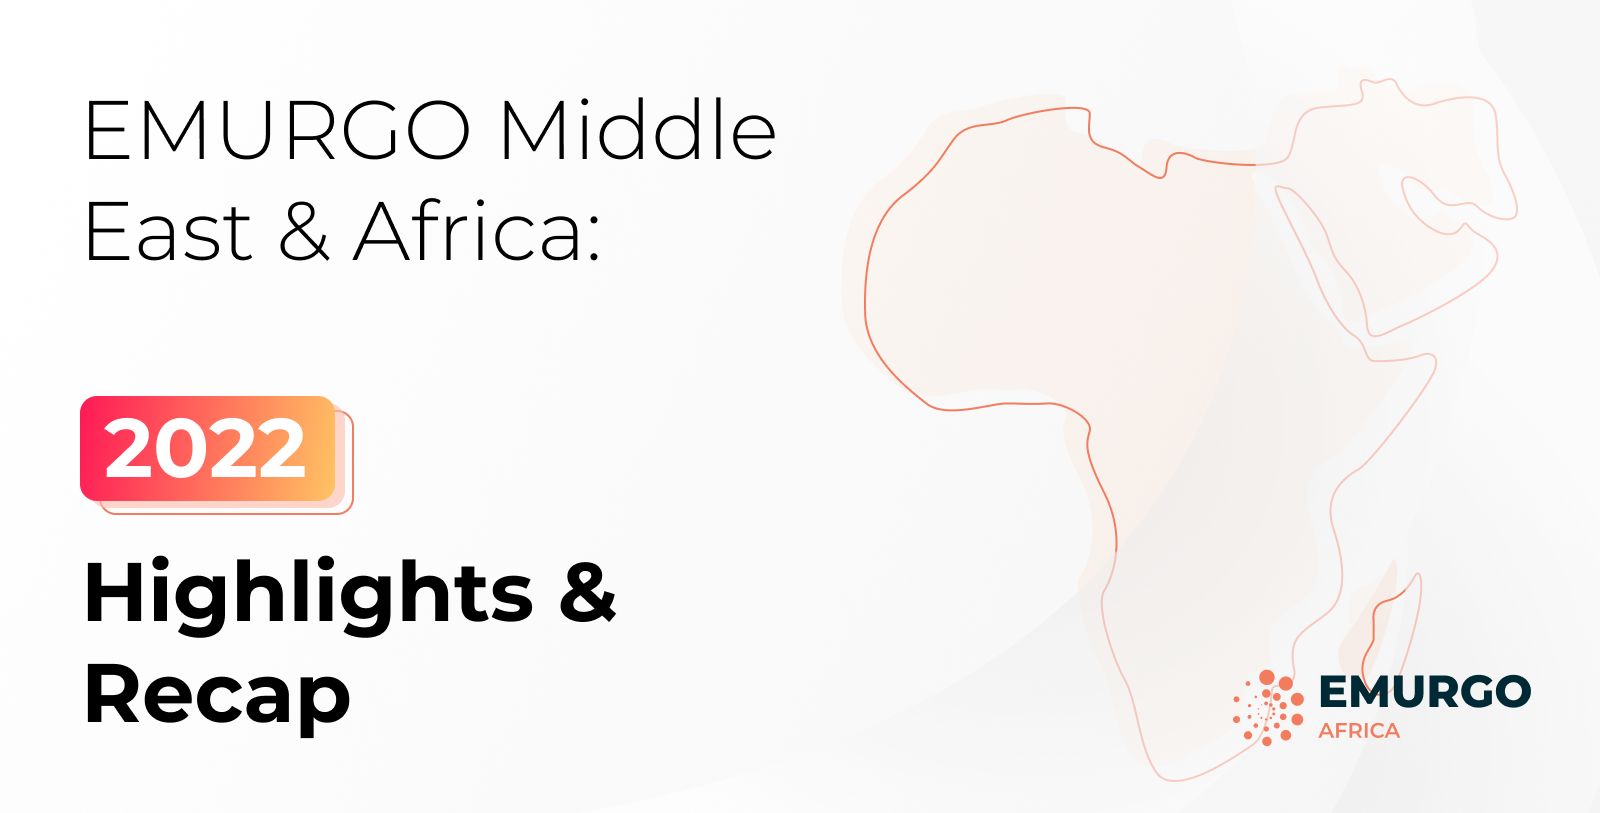 EMURGO-Middle-East-Africa-2022-Highlights.png